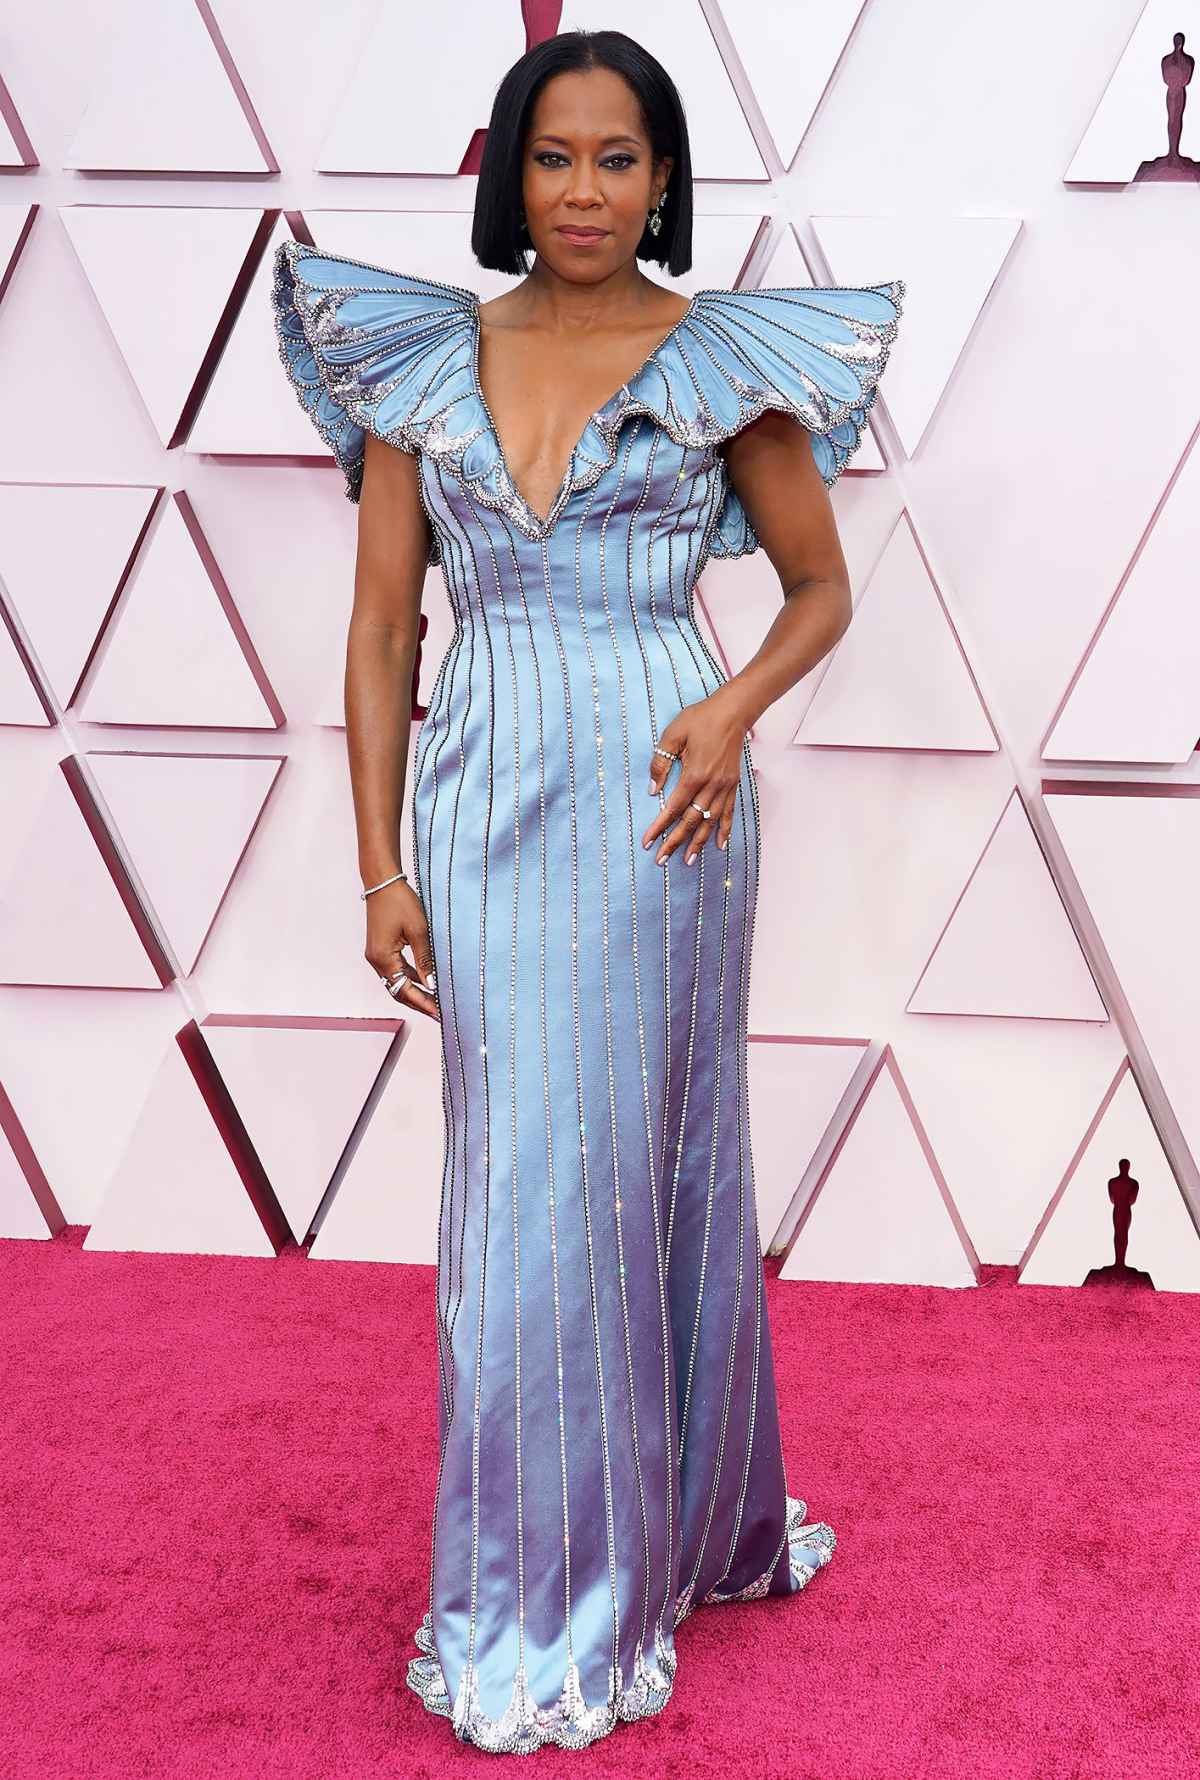 Top 10 Best Dressed at the 2021 Oscars: H.E.R Pays Homage to